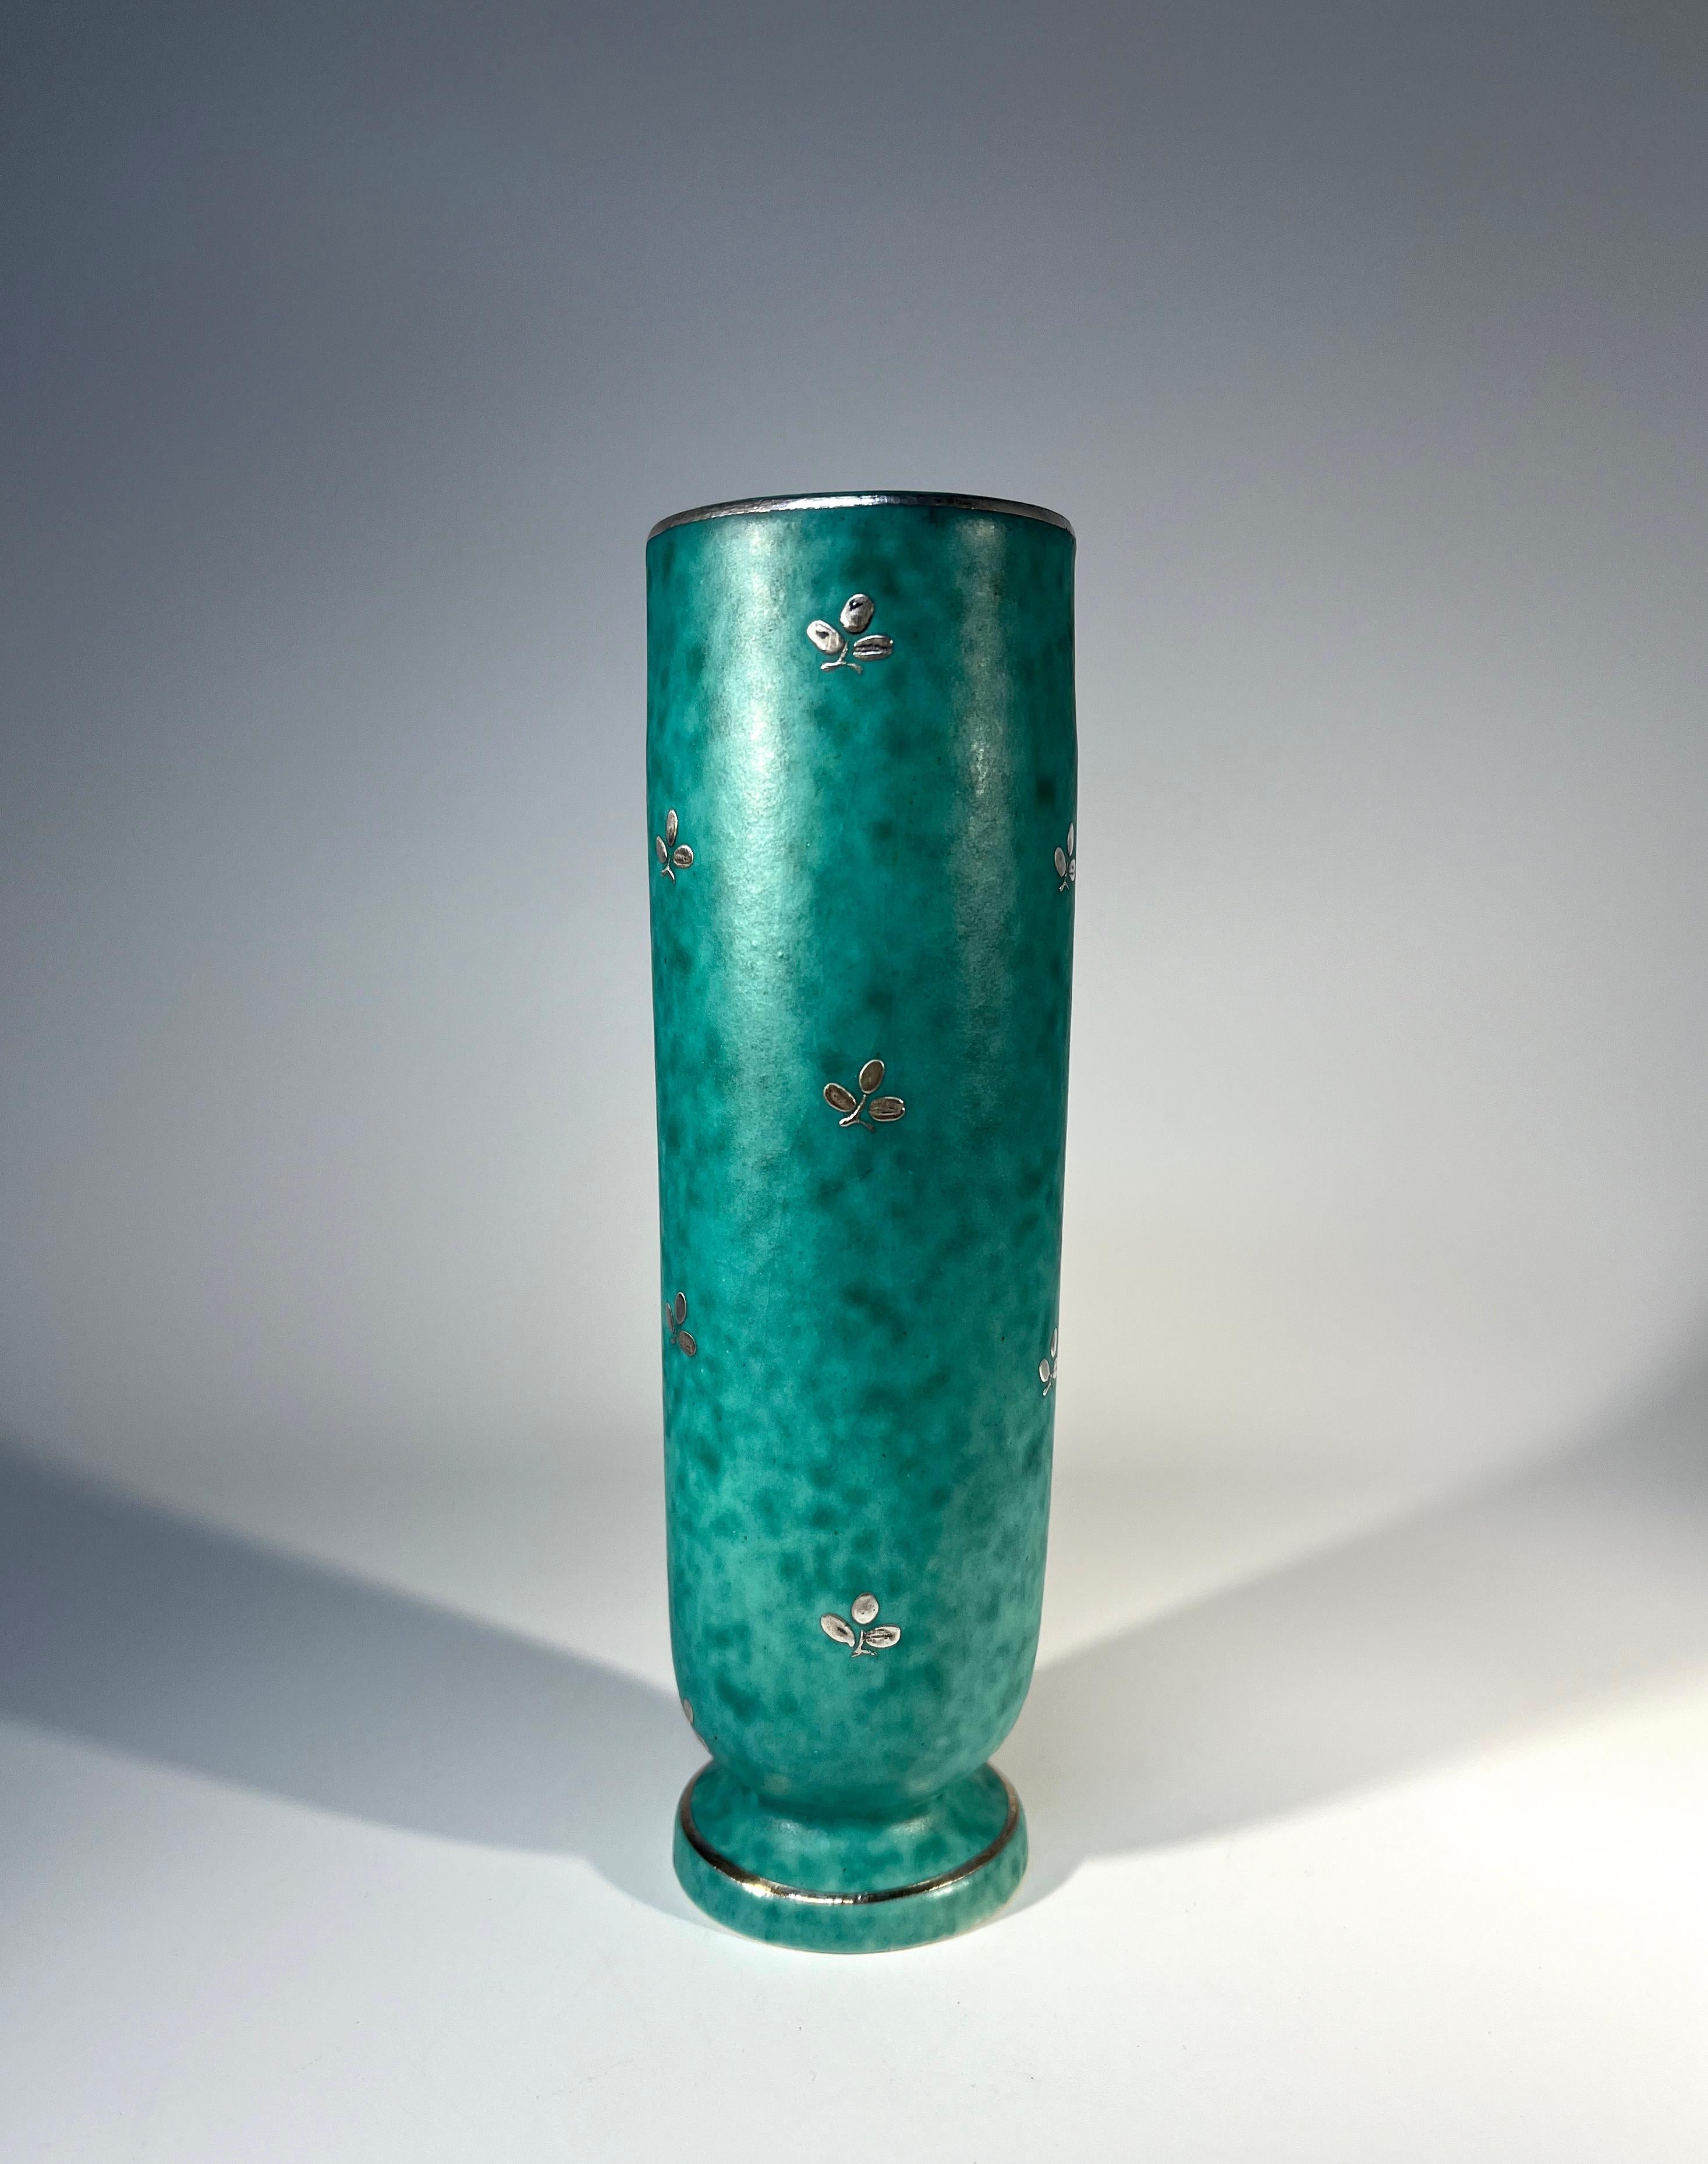 Petite vase by Wilhelm Kage for Gustavsberg, Sweden from the Argenta collection.
Decorated with trefoil flower sprigs of applied silver on mottled green stoneware.
Silver bands to rim and foot
Circa 1960's
Base marked Gustavsberg Argenta 1029 B, A V